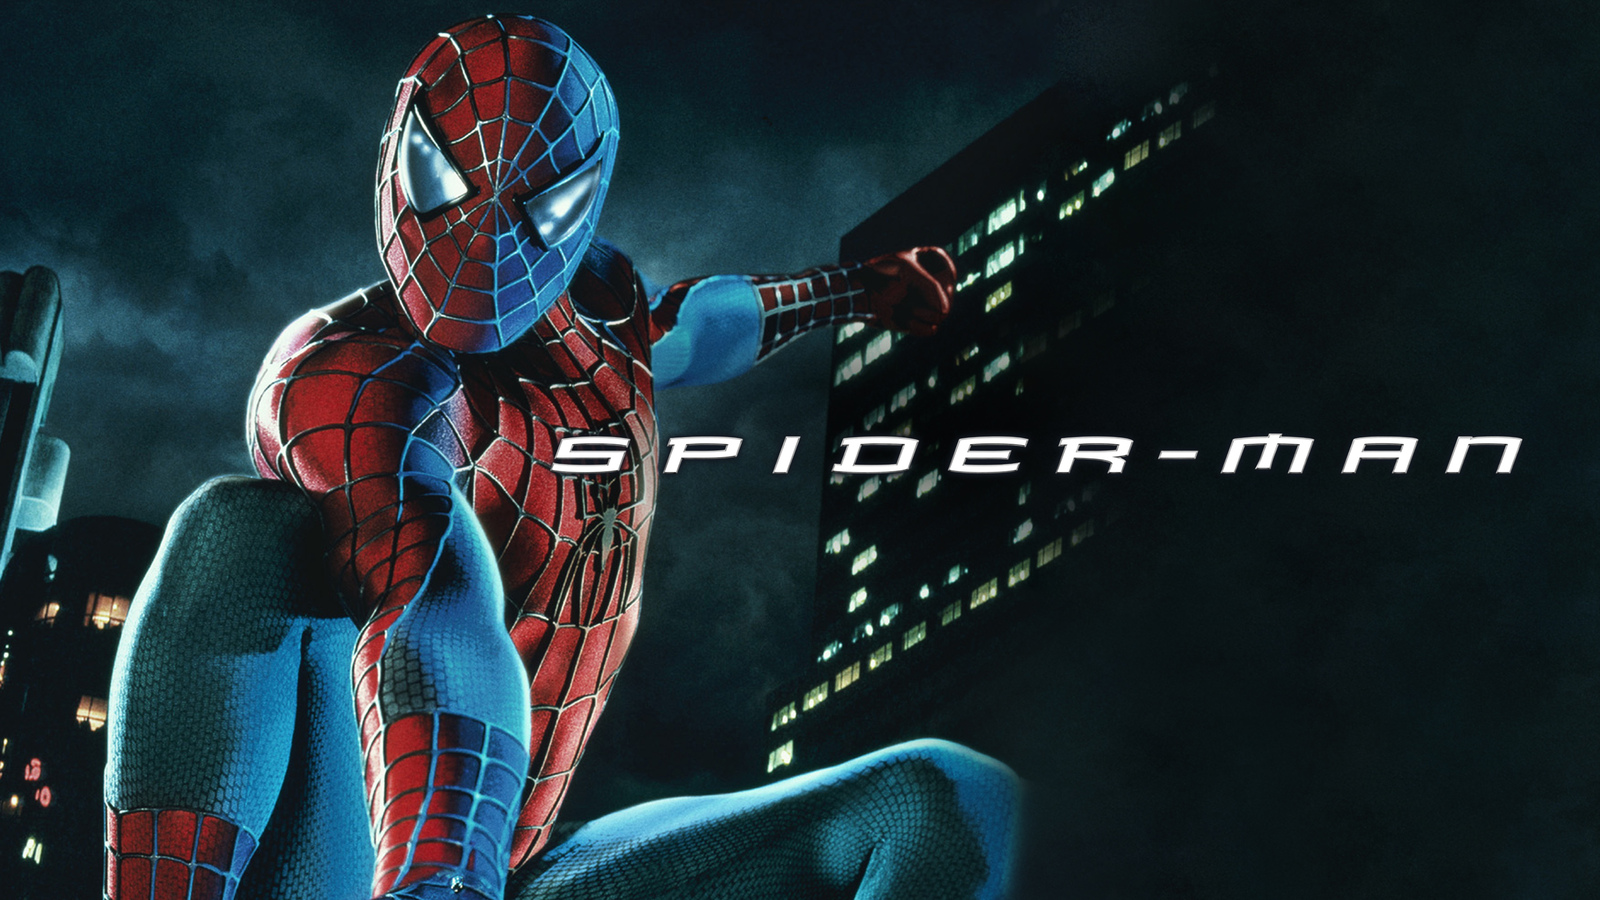 Primary image for The Amazing Spider-Man Movie Poster 2012 Art Film Print Size 24x36 27x40" #1